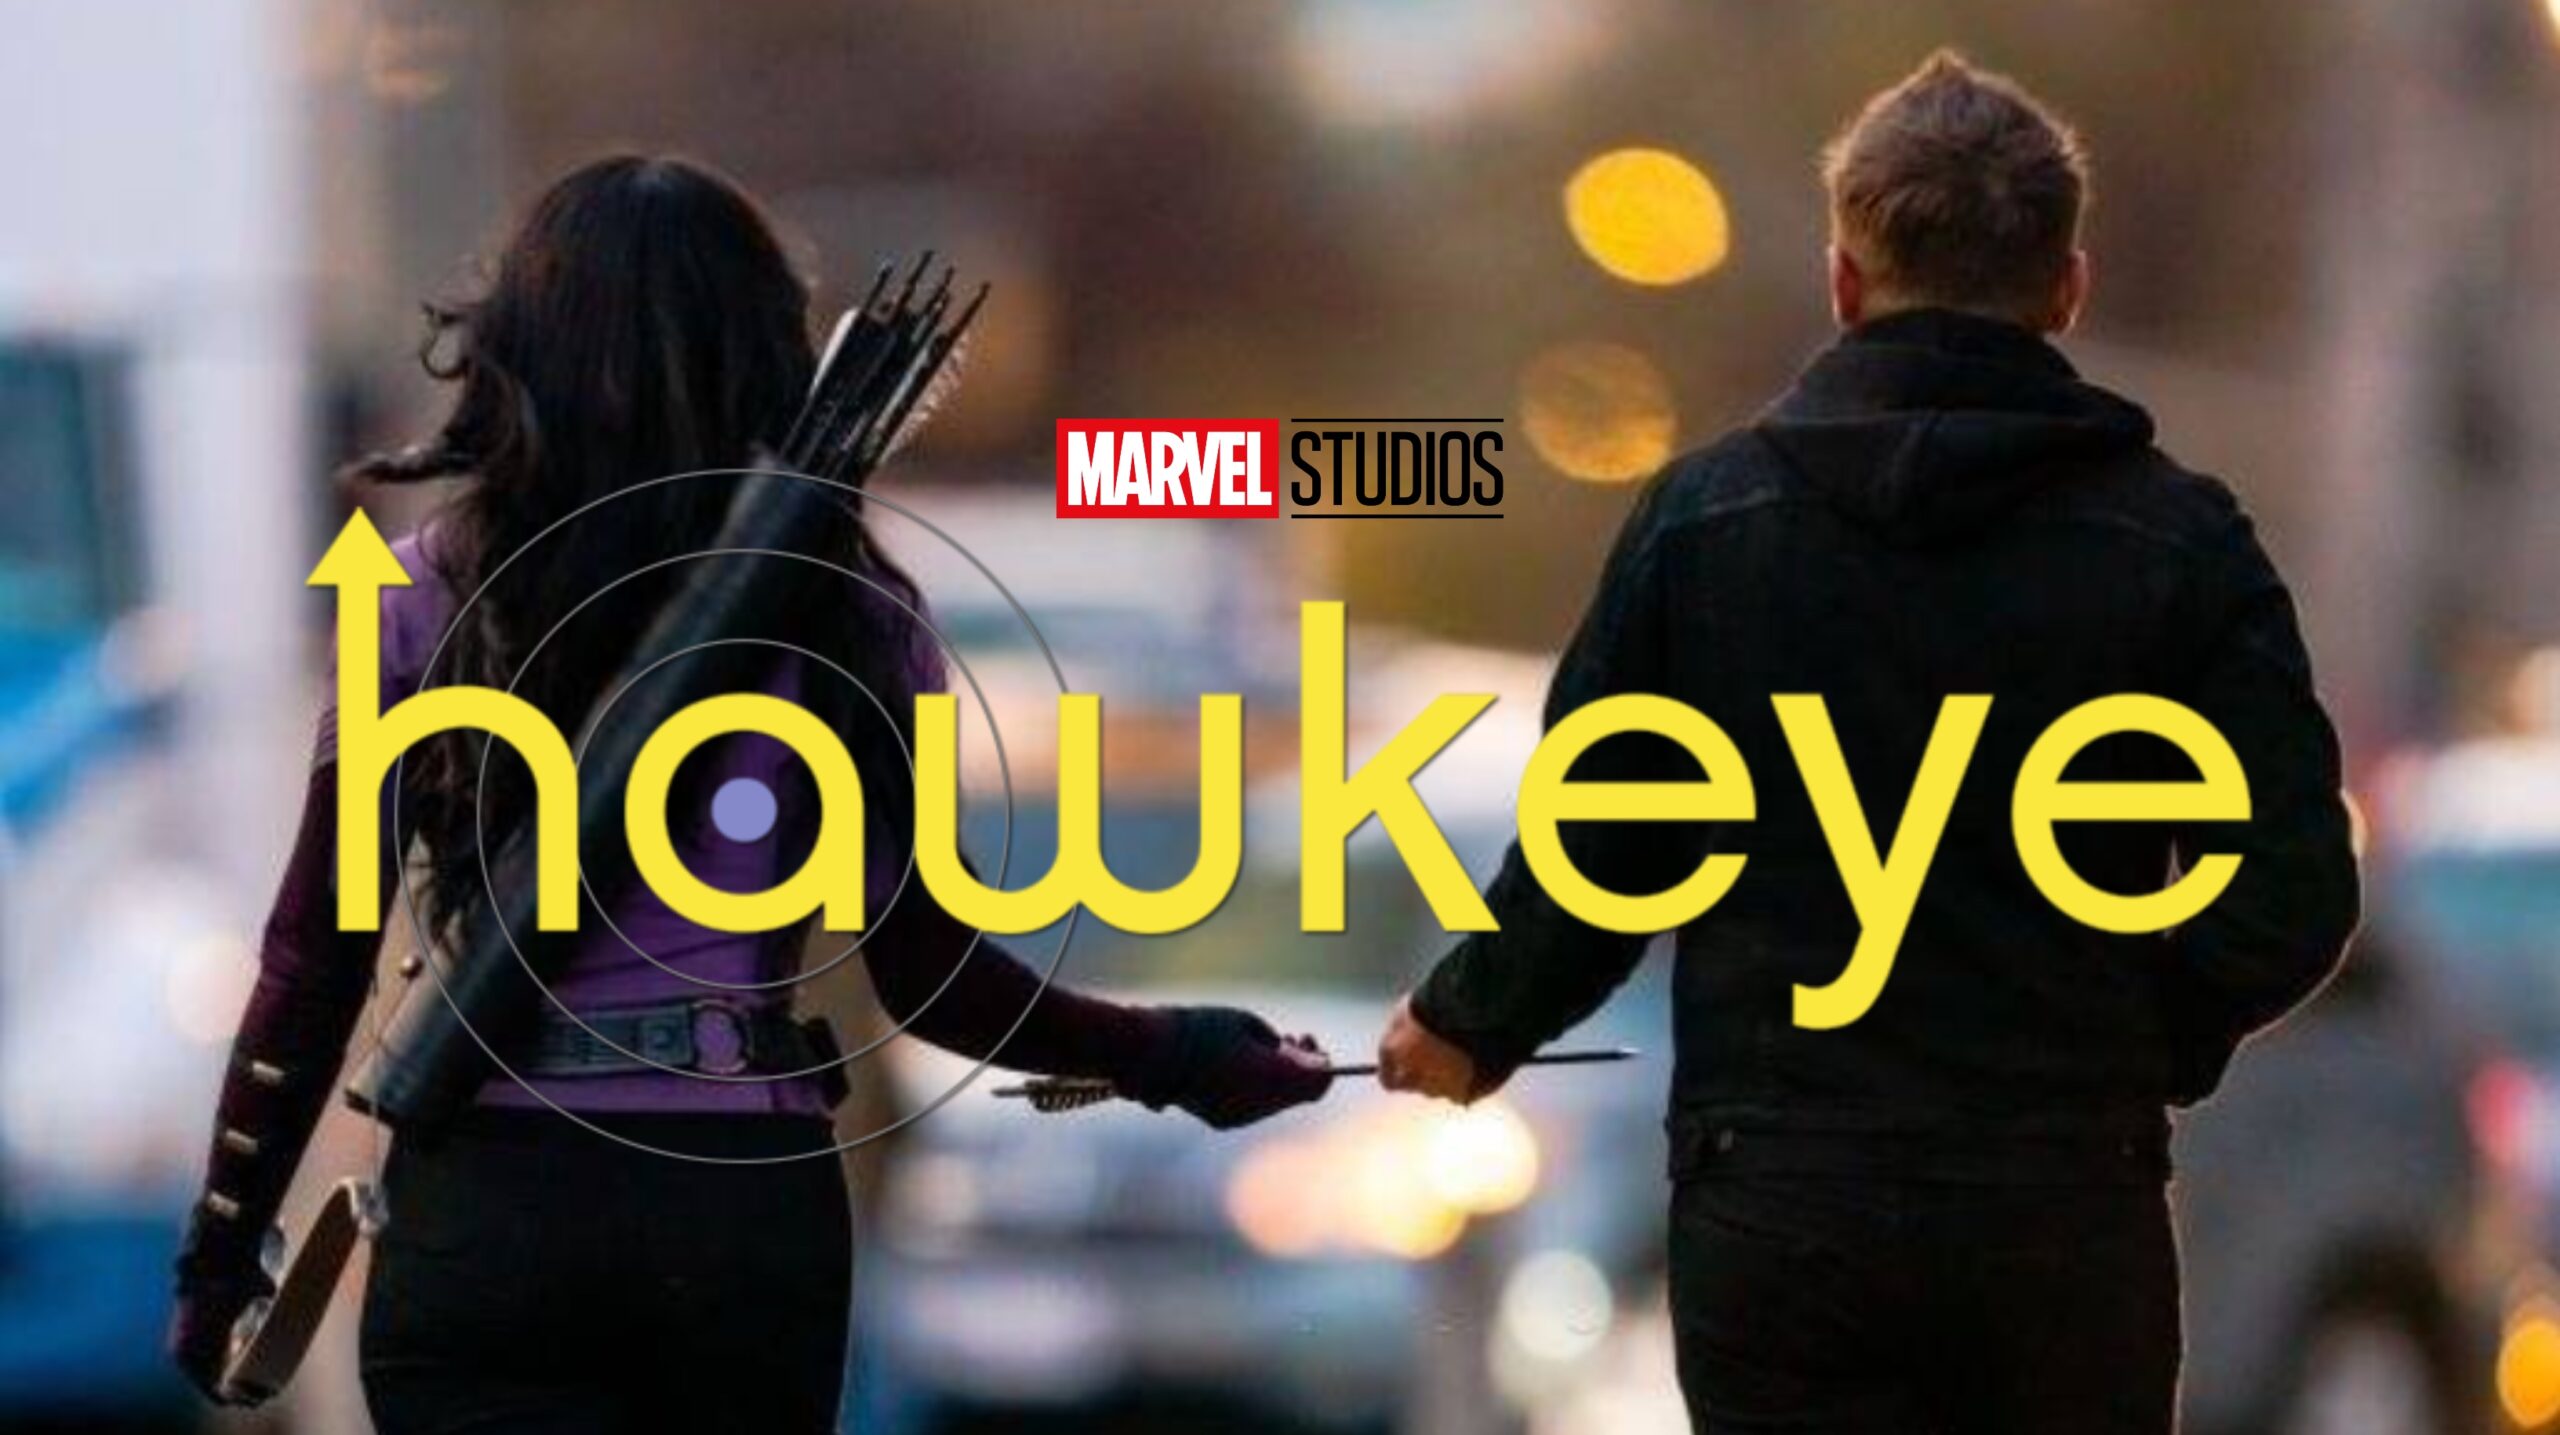 Hailee Steinfeld as Kate Bishop and Jeremy Renner as Clint Barton in the Hawkeye Series